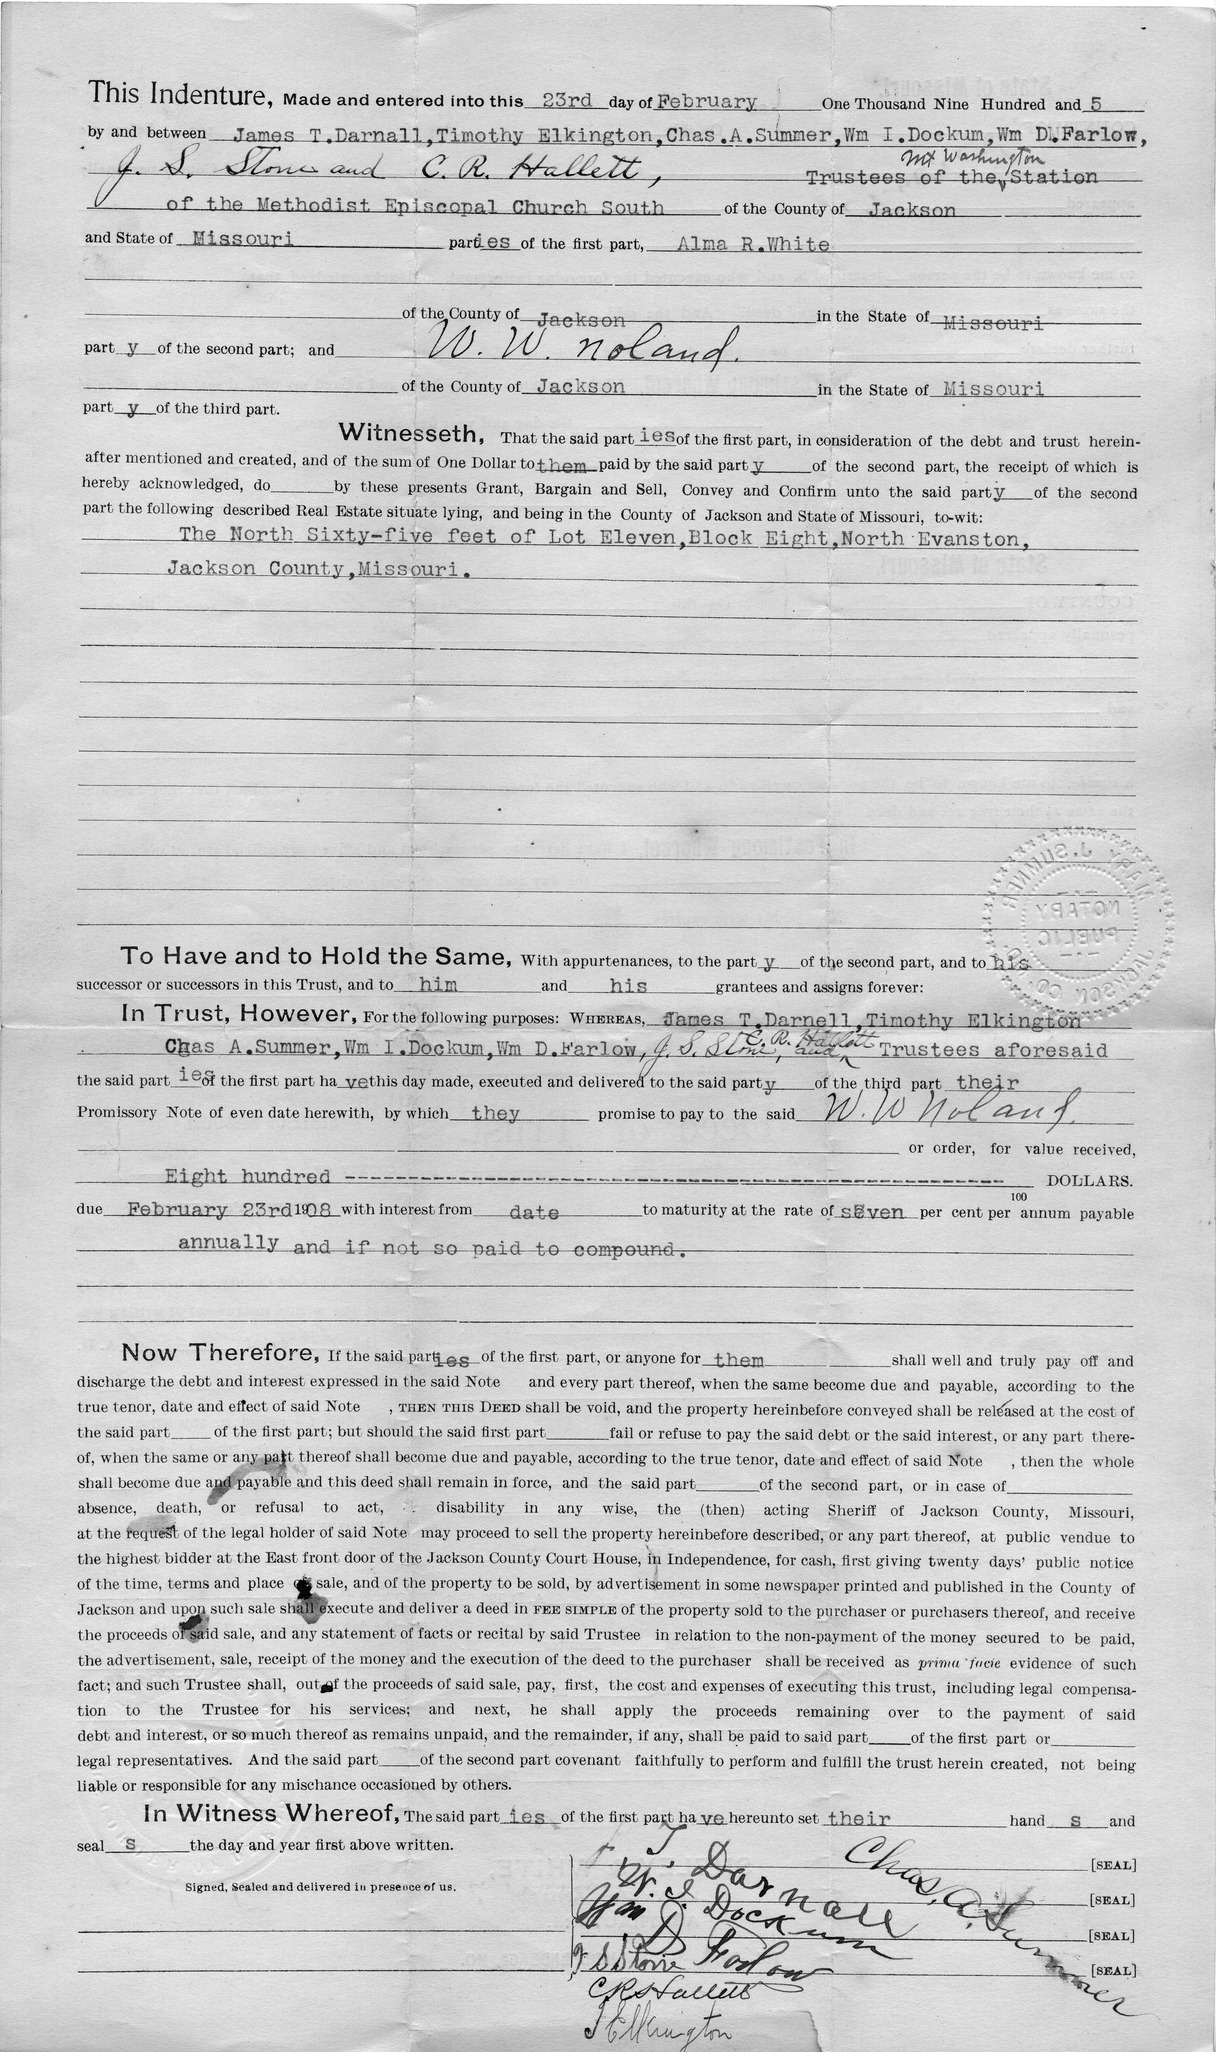 Deed of Trust from James T. Darnall et al. to Alma R. White for W. W. Noland